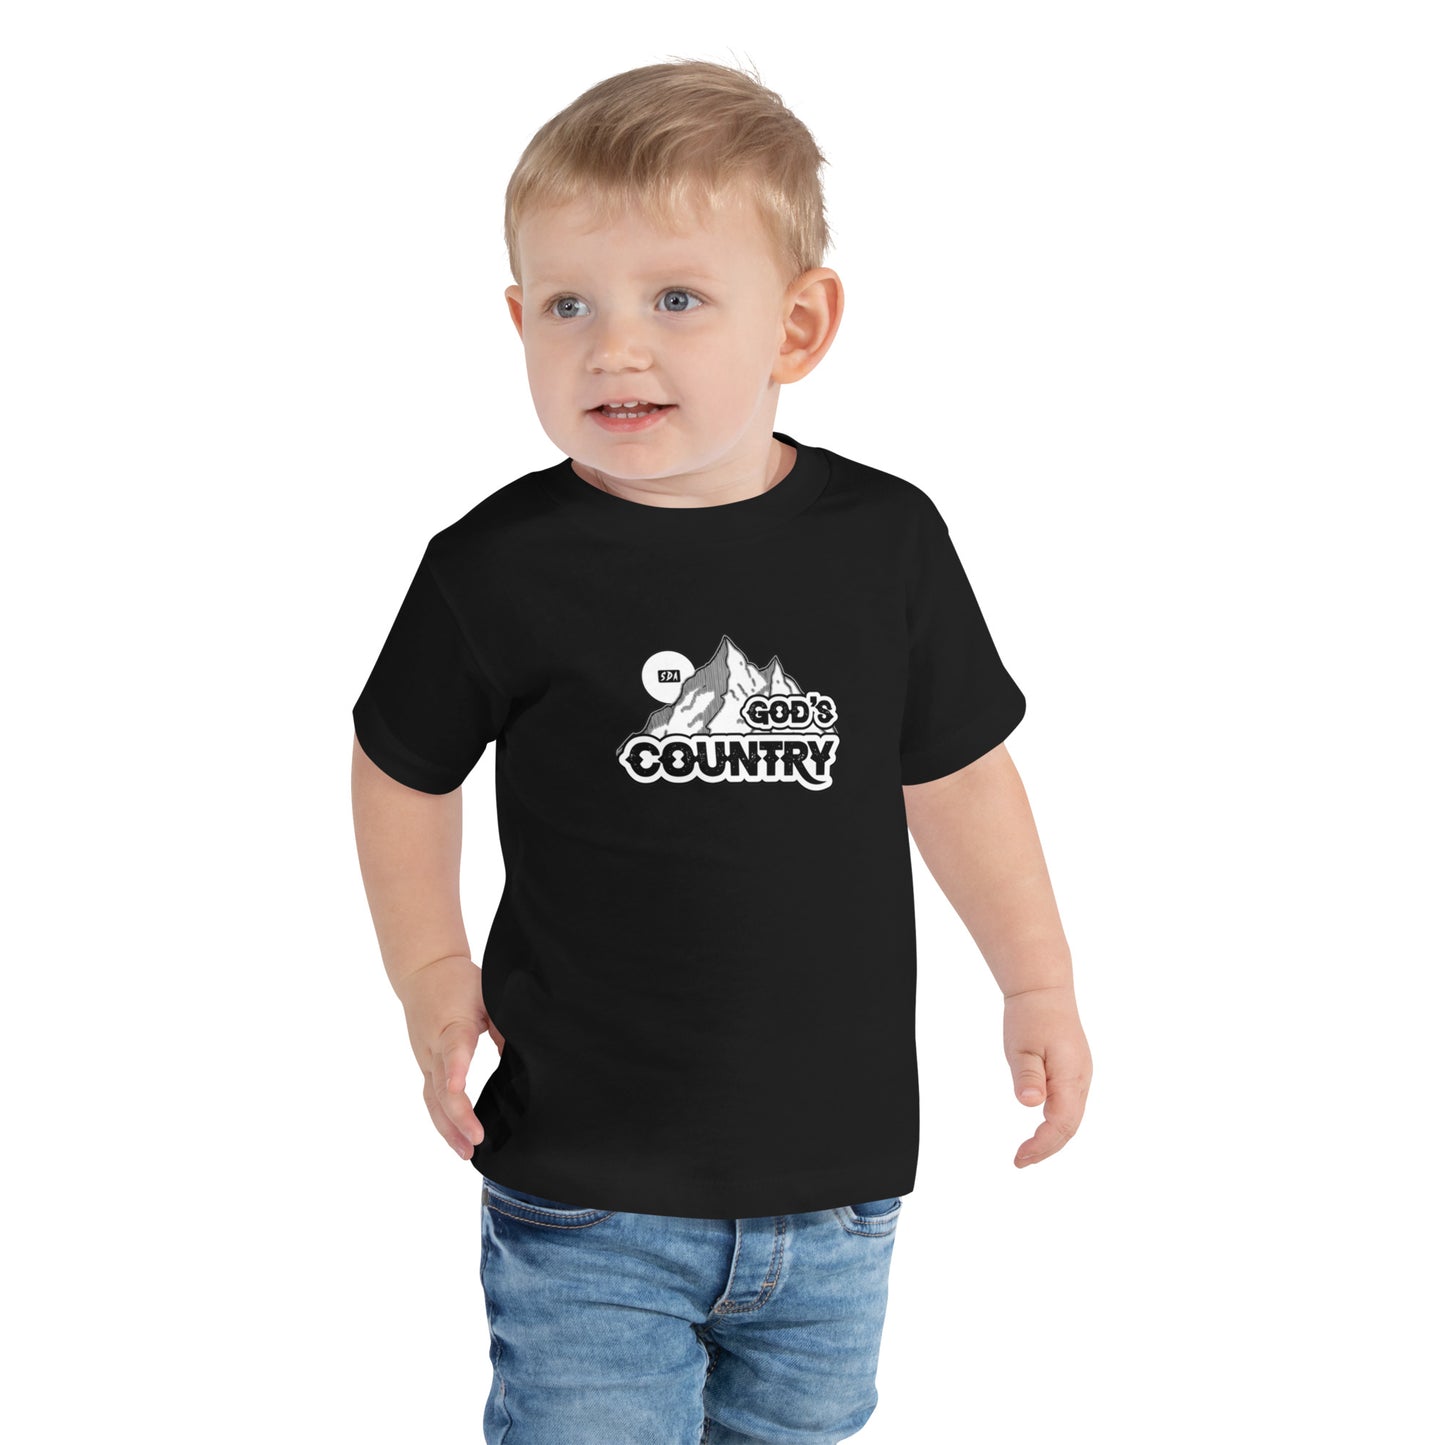 GODS COUNTRY Toddler Short Sleeve Tee